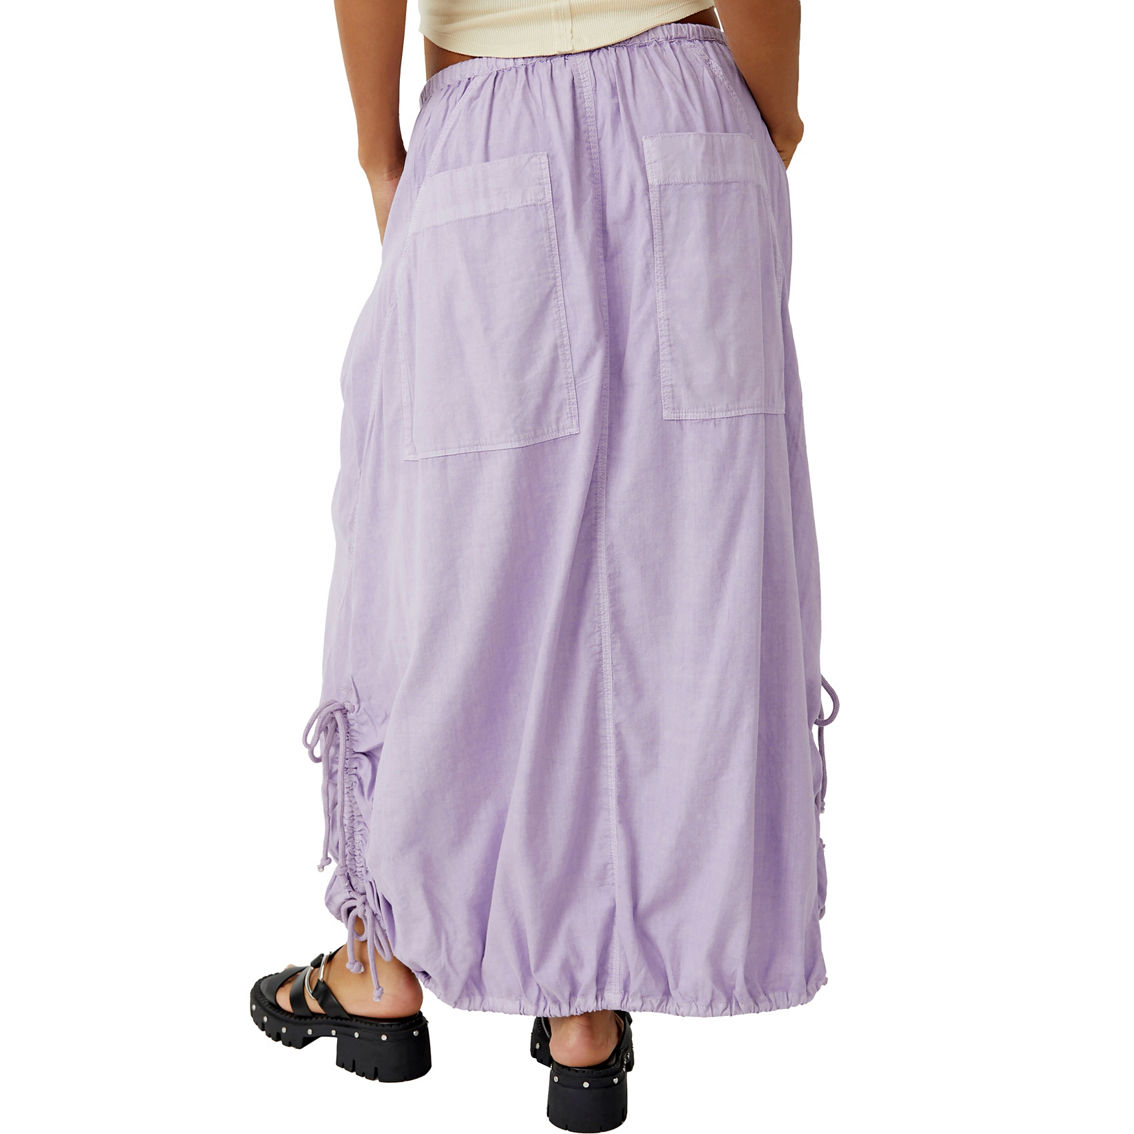 Free People Picture Perfect Parachute Skirt - Image 2 of 6